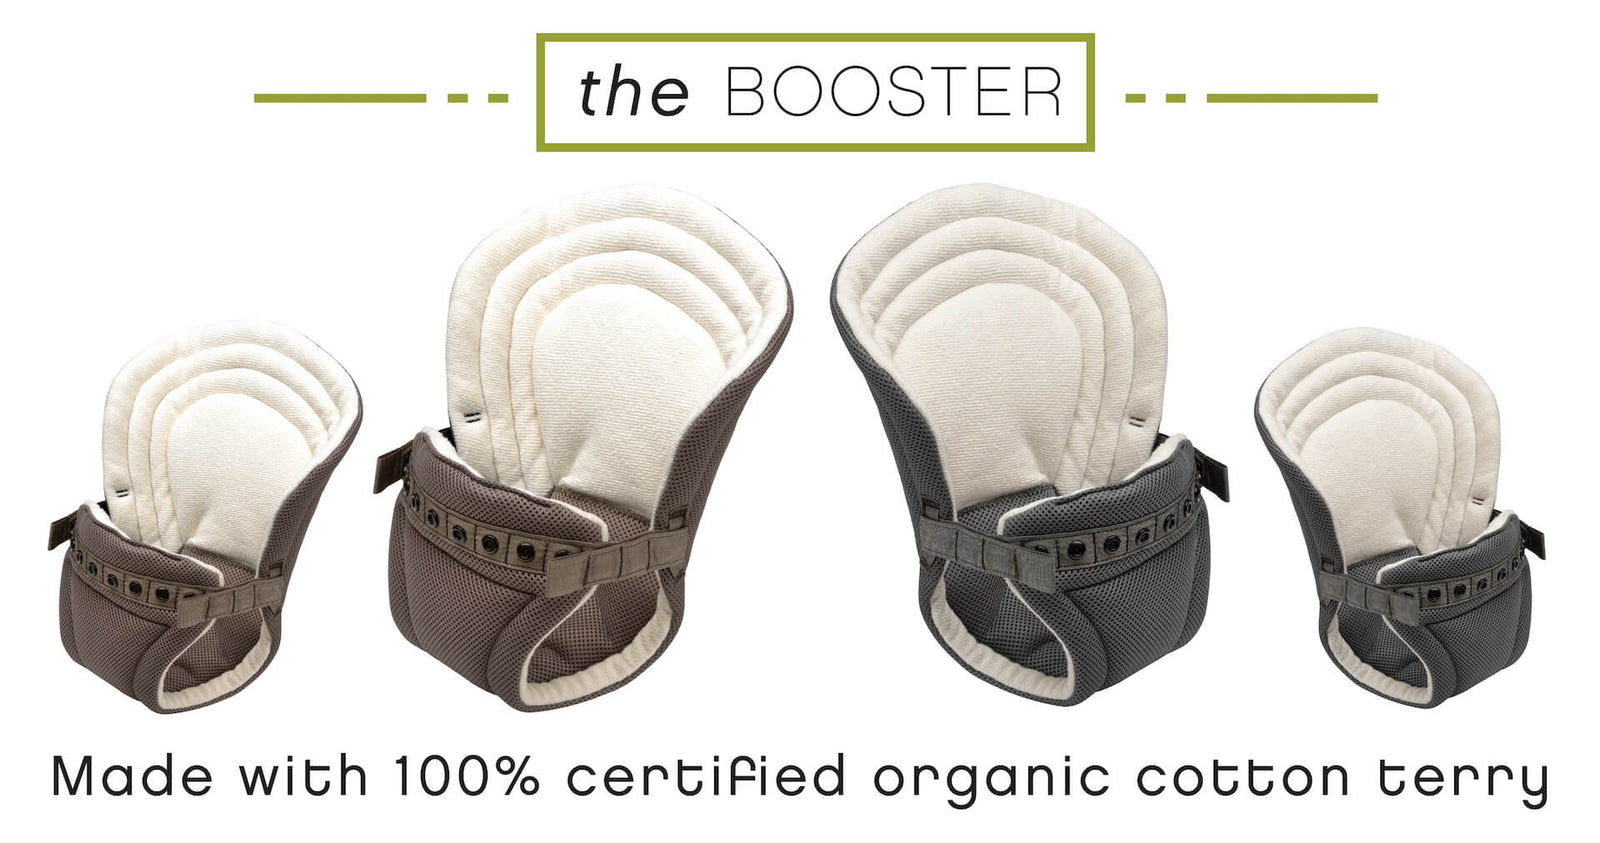 Product display showing all color variations of the Baby Booster Infant Insert by Onya Baby